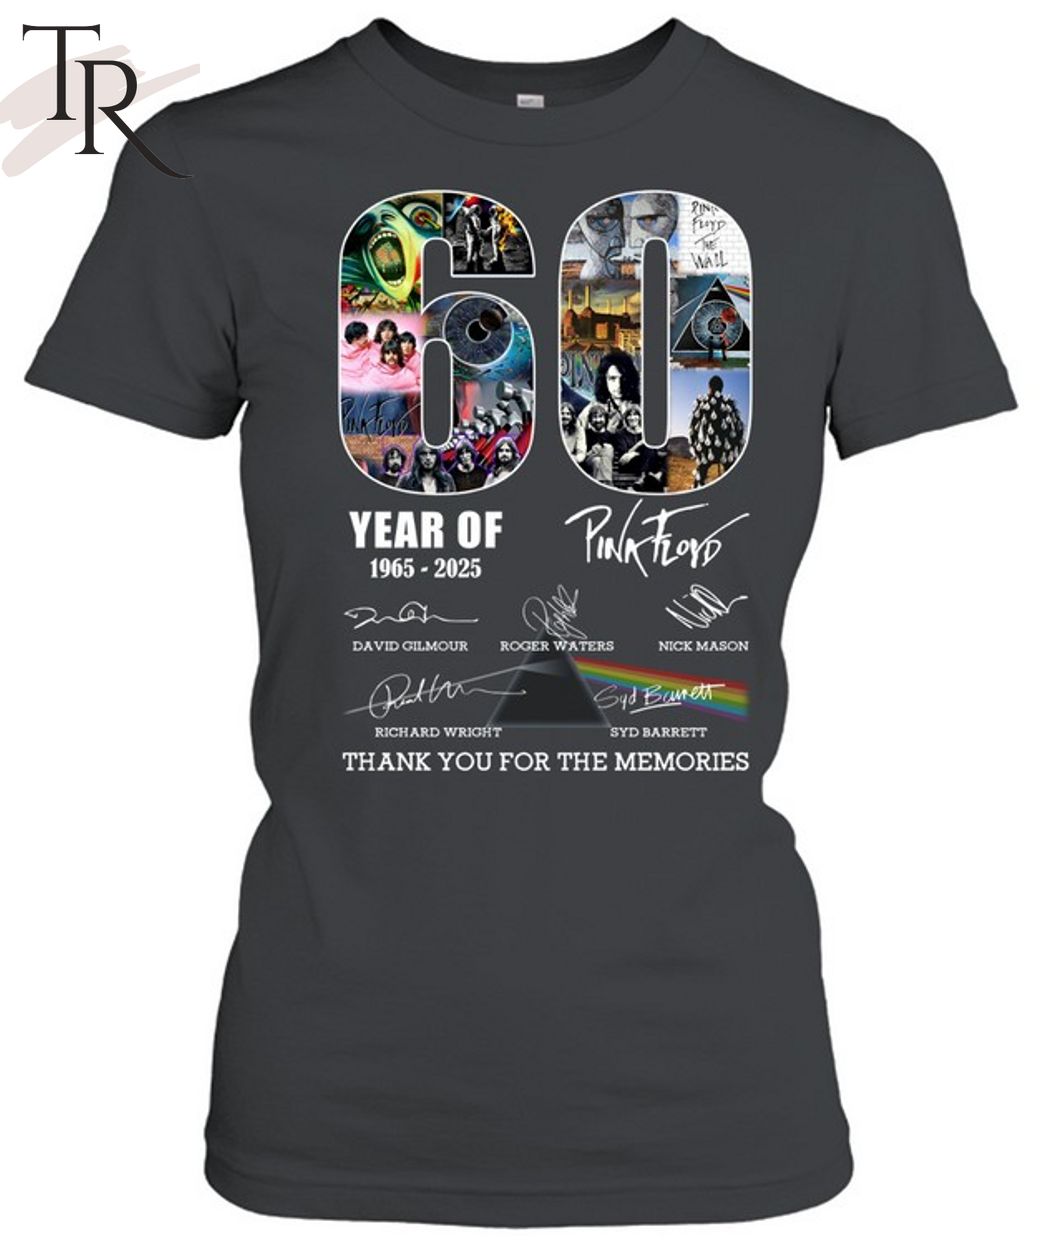 60 Years Of 1965-2025 Pink Ployd Thank You For The Memories T-Shirt